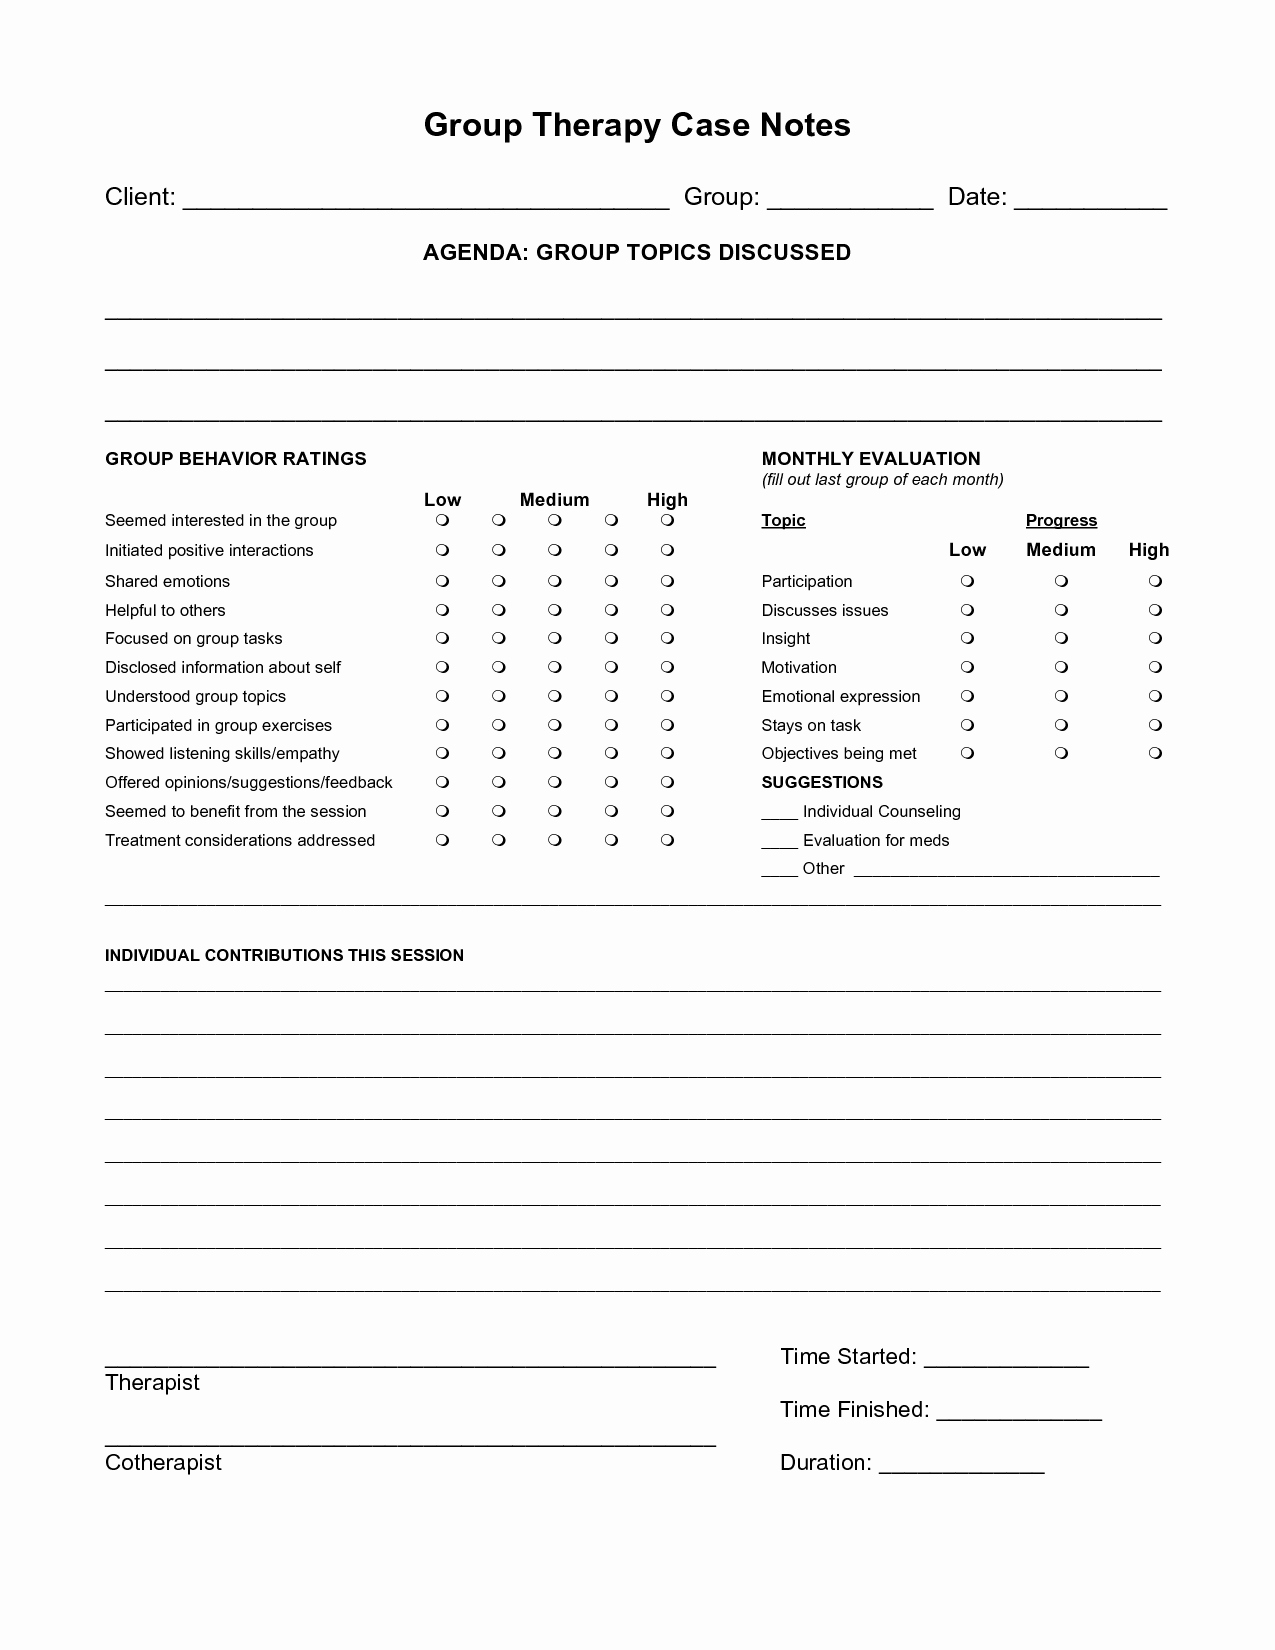 Inpatient Psychiatric Treatment Plan Template Best Of Free Case Note Templates Group therapy Case Notes